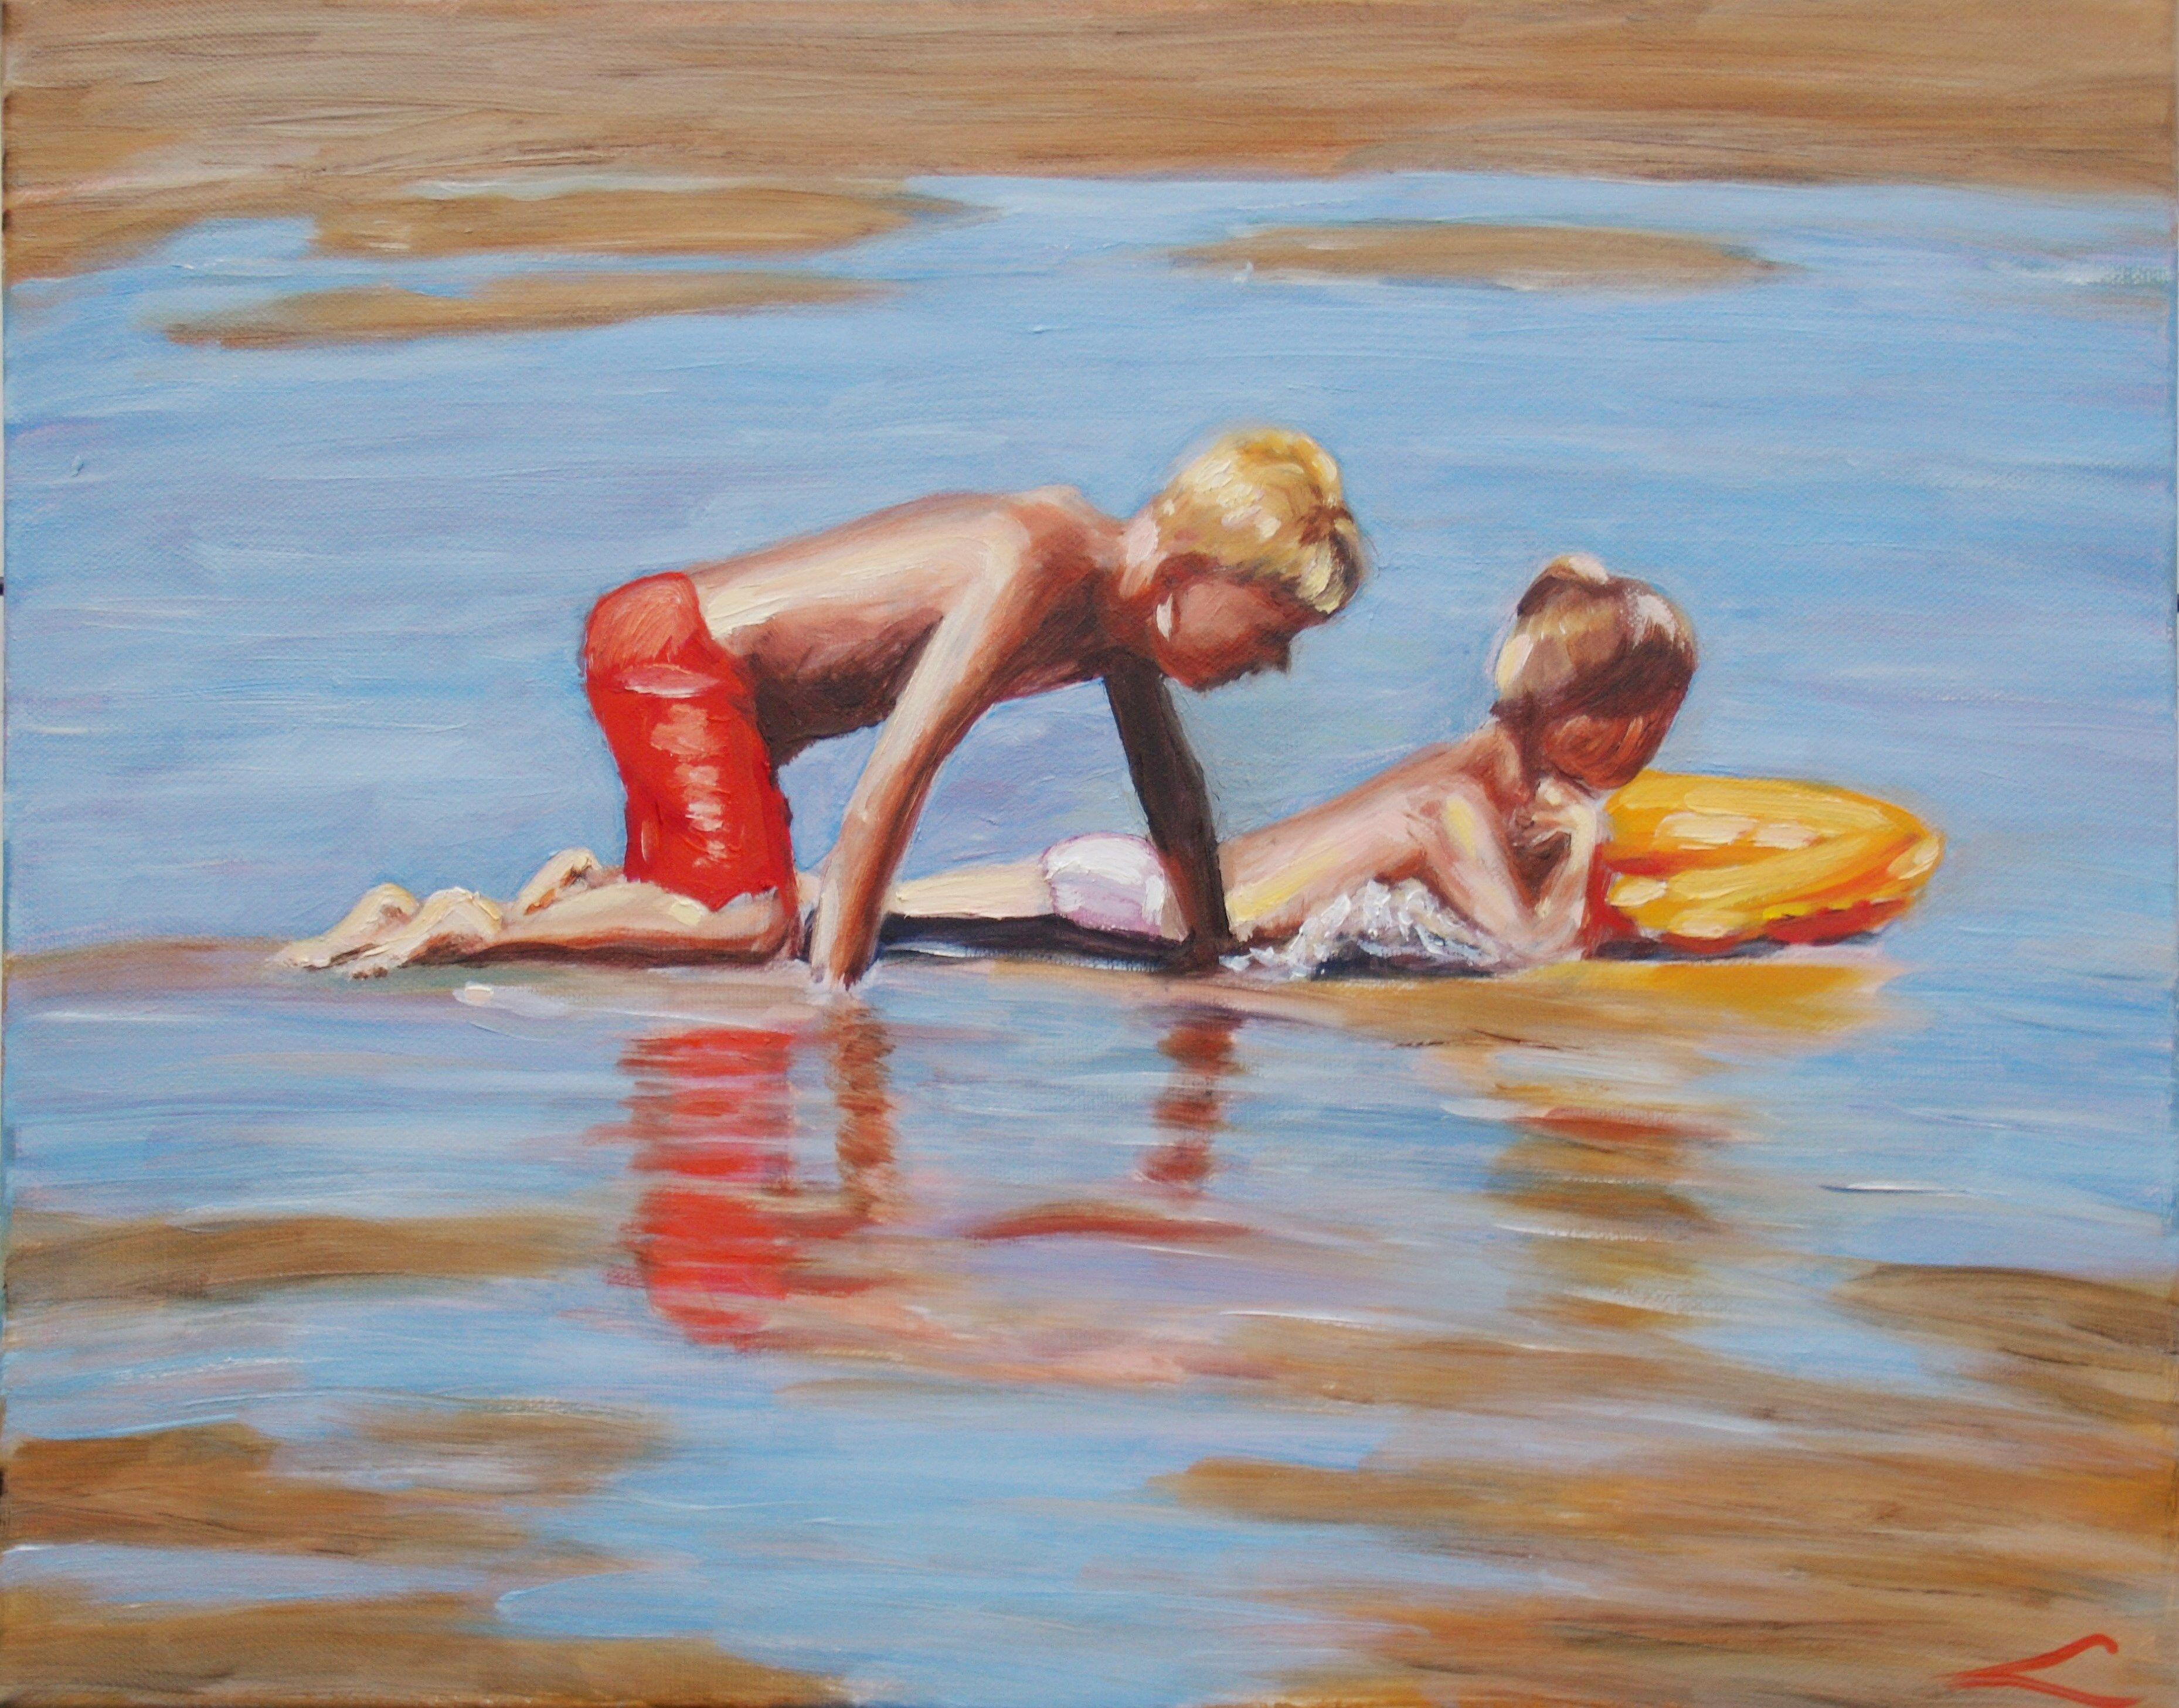 Children at the sea. Alla prima oil painting with few final tuches when dry. Beach Paintings always inspire thoughts of holidays, long walks, warm breezes and relaxation. beach and ocean themed paintings that will bring the outdoors inside and